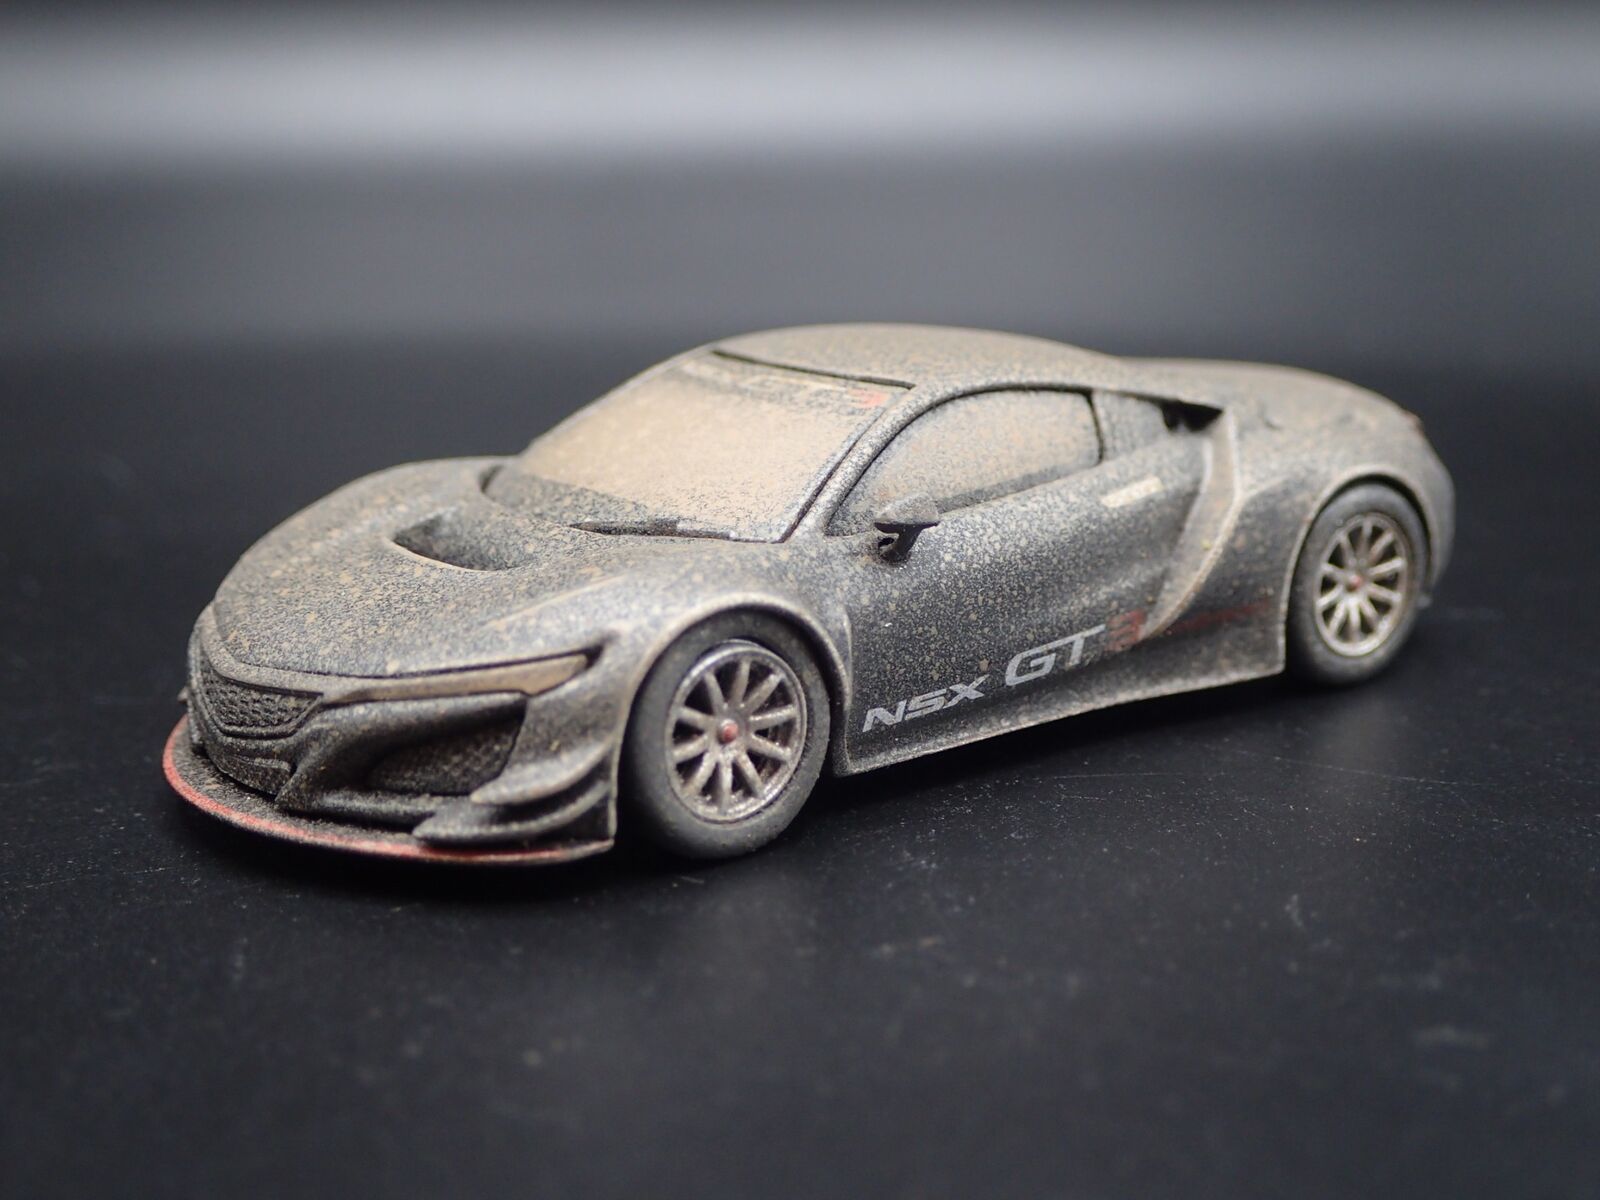 2016-2022 ACURA NSX GT3 RACE WRECKED MUDDY 1:64 SCALE DIORAMA DIECAST relisted